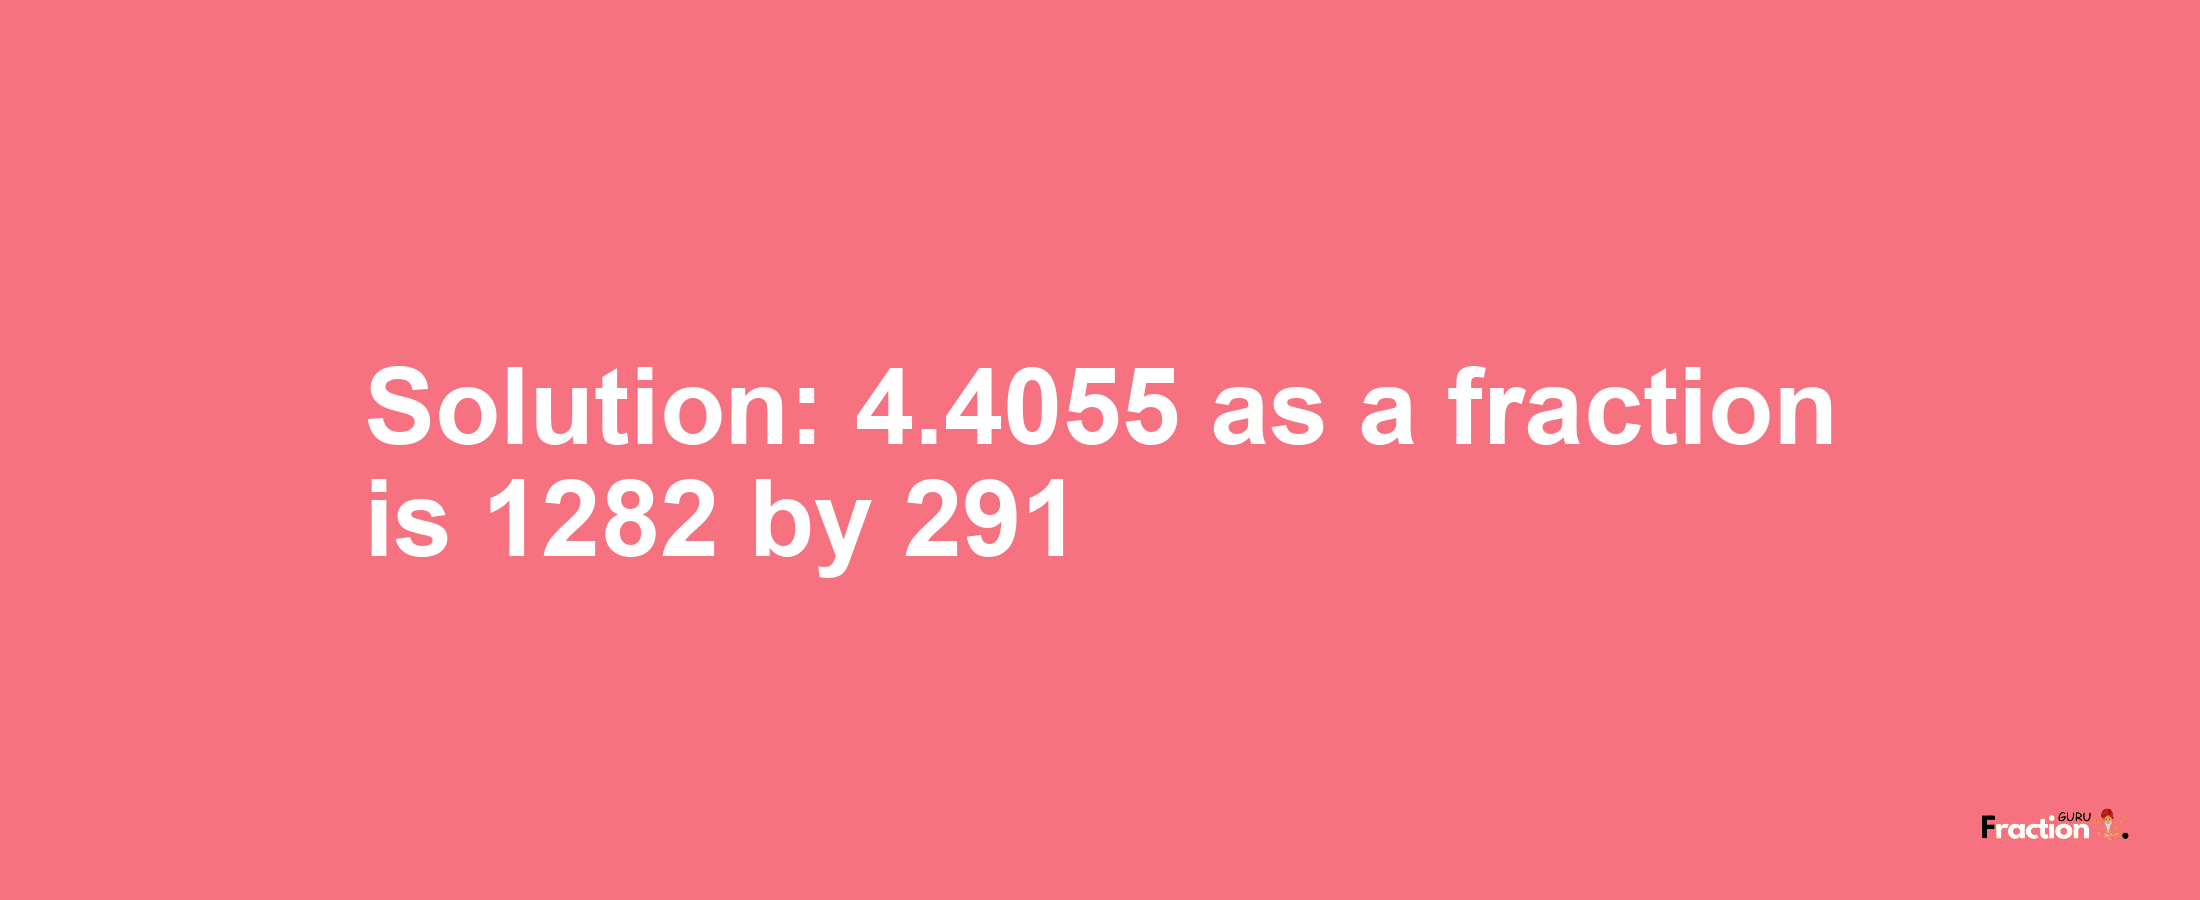 Solution:4.4055 as a fraction is 1282/291